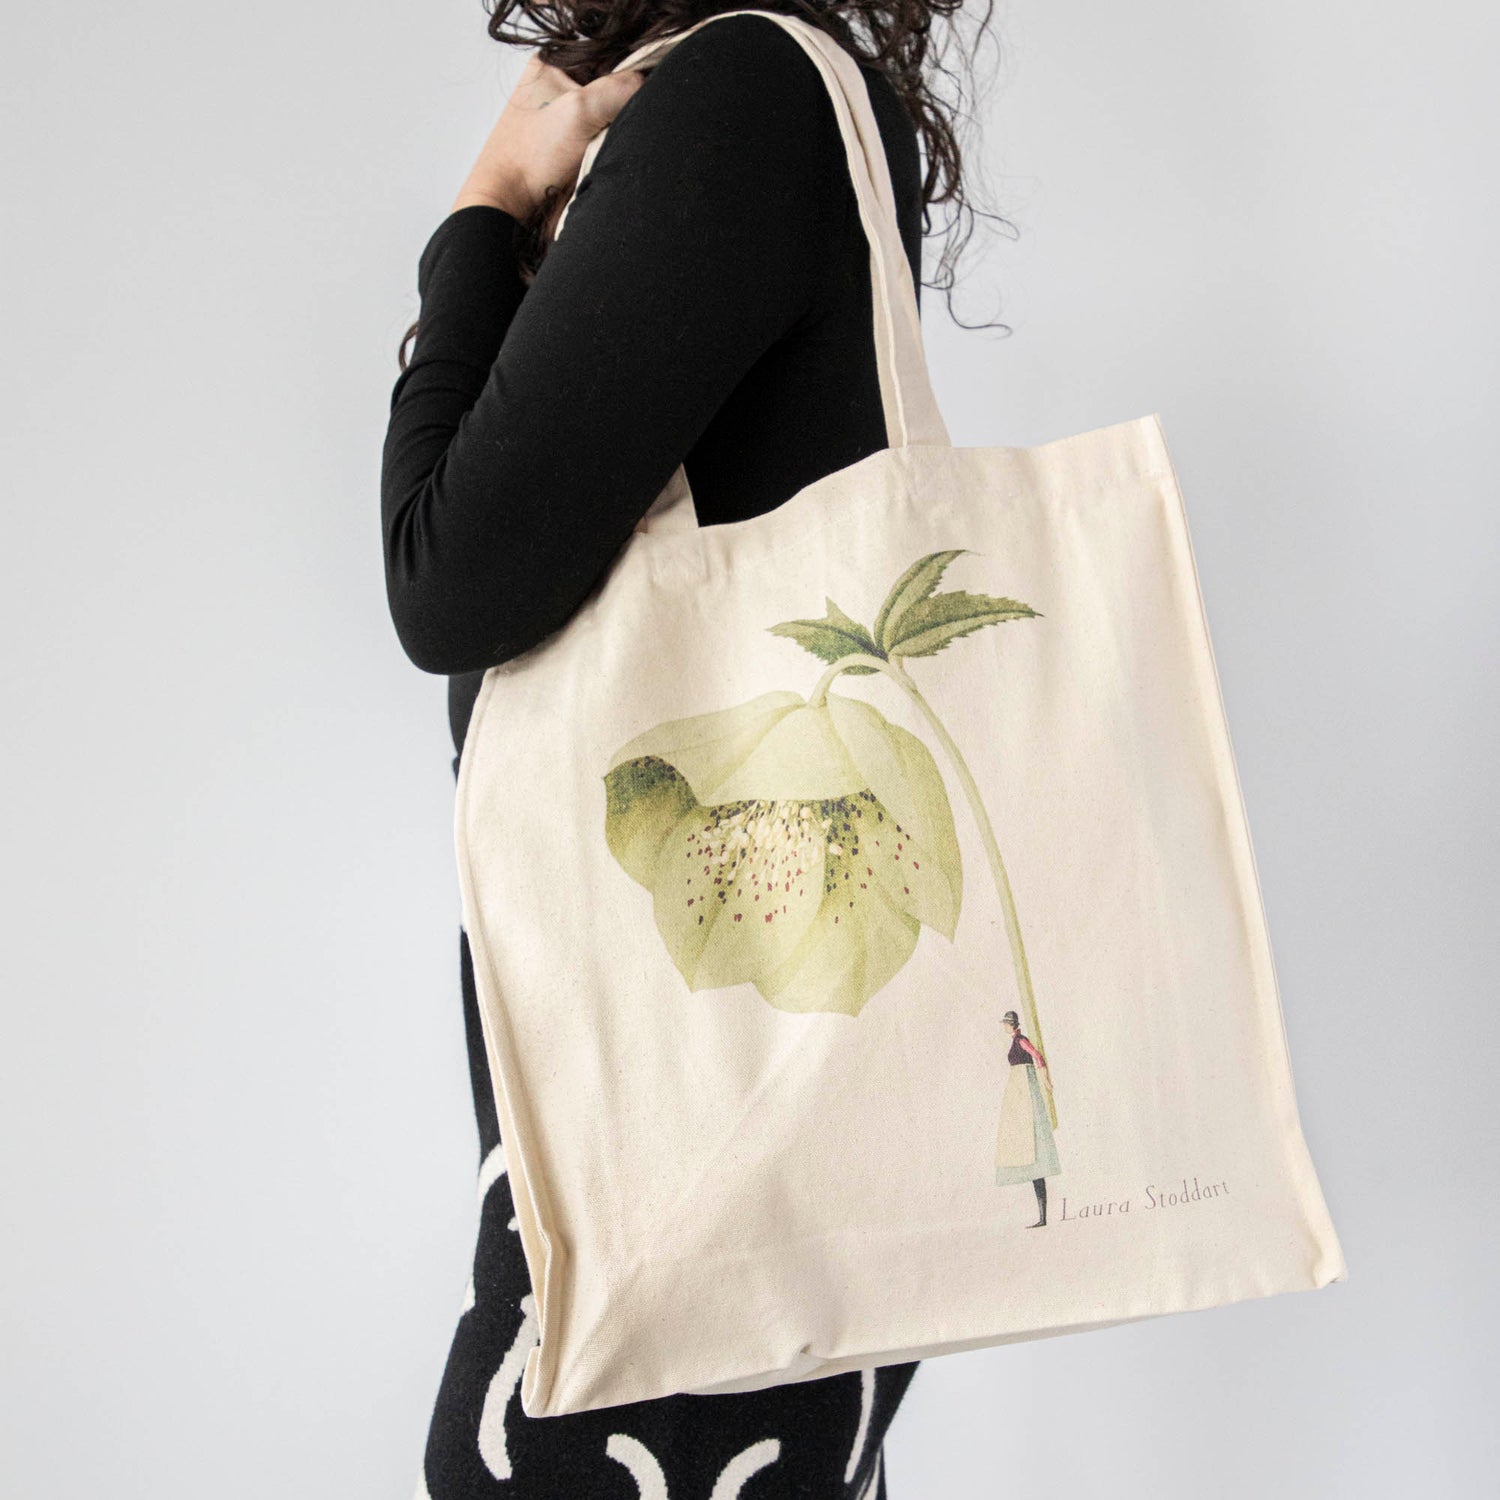 A close-up of the Hellebore Heavyweight Canvas Tote Bag being carried over the shoulder of a woman in black, showing the large functional size of the bag.